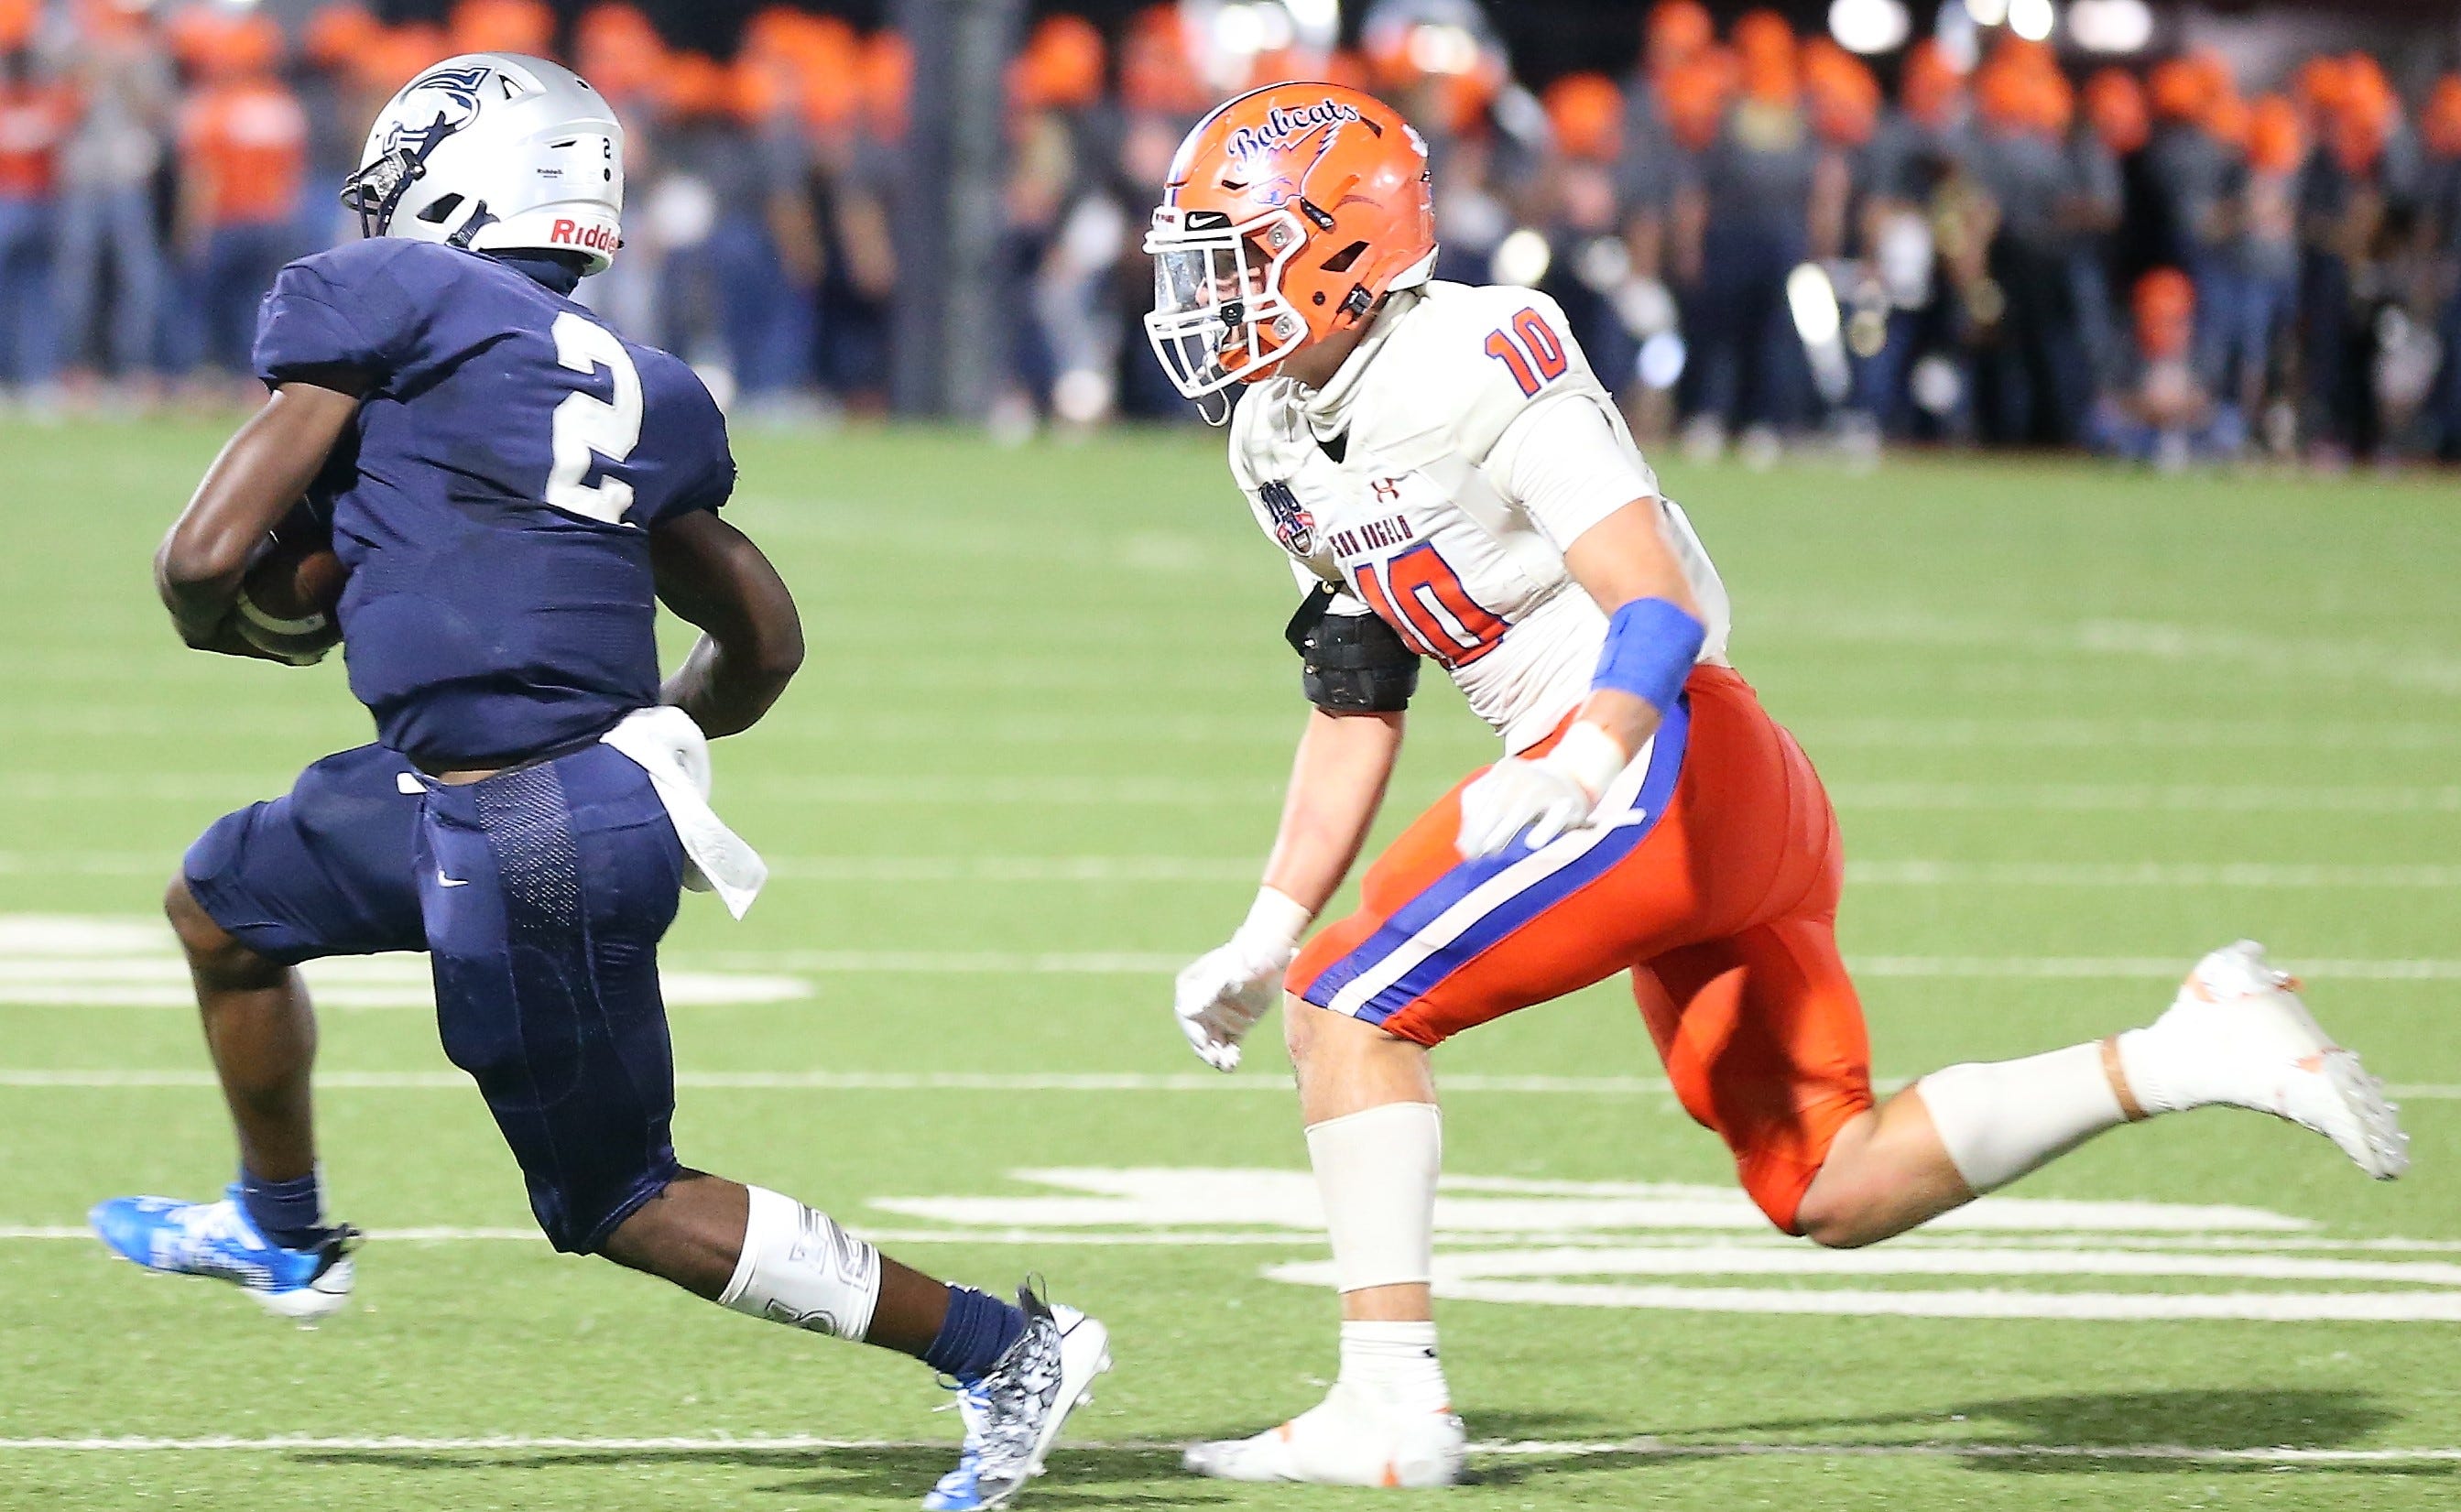 San Angelo Central settles for third place after blowout loss at Midland Lee